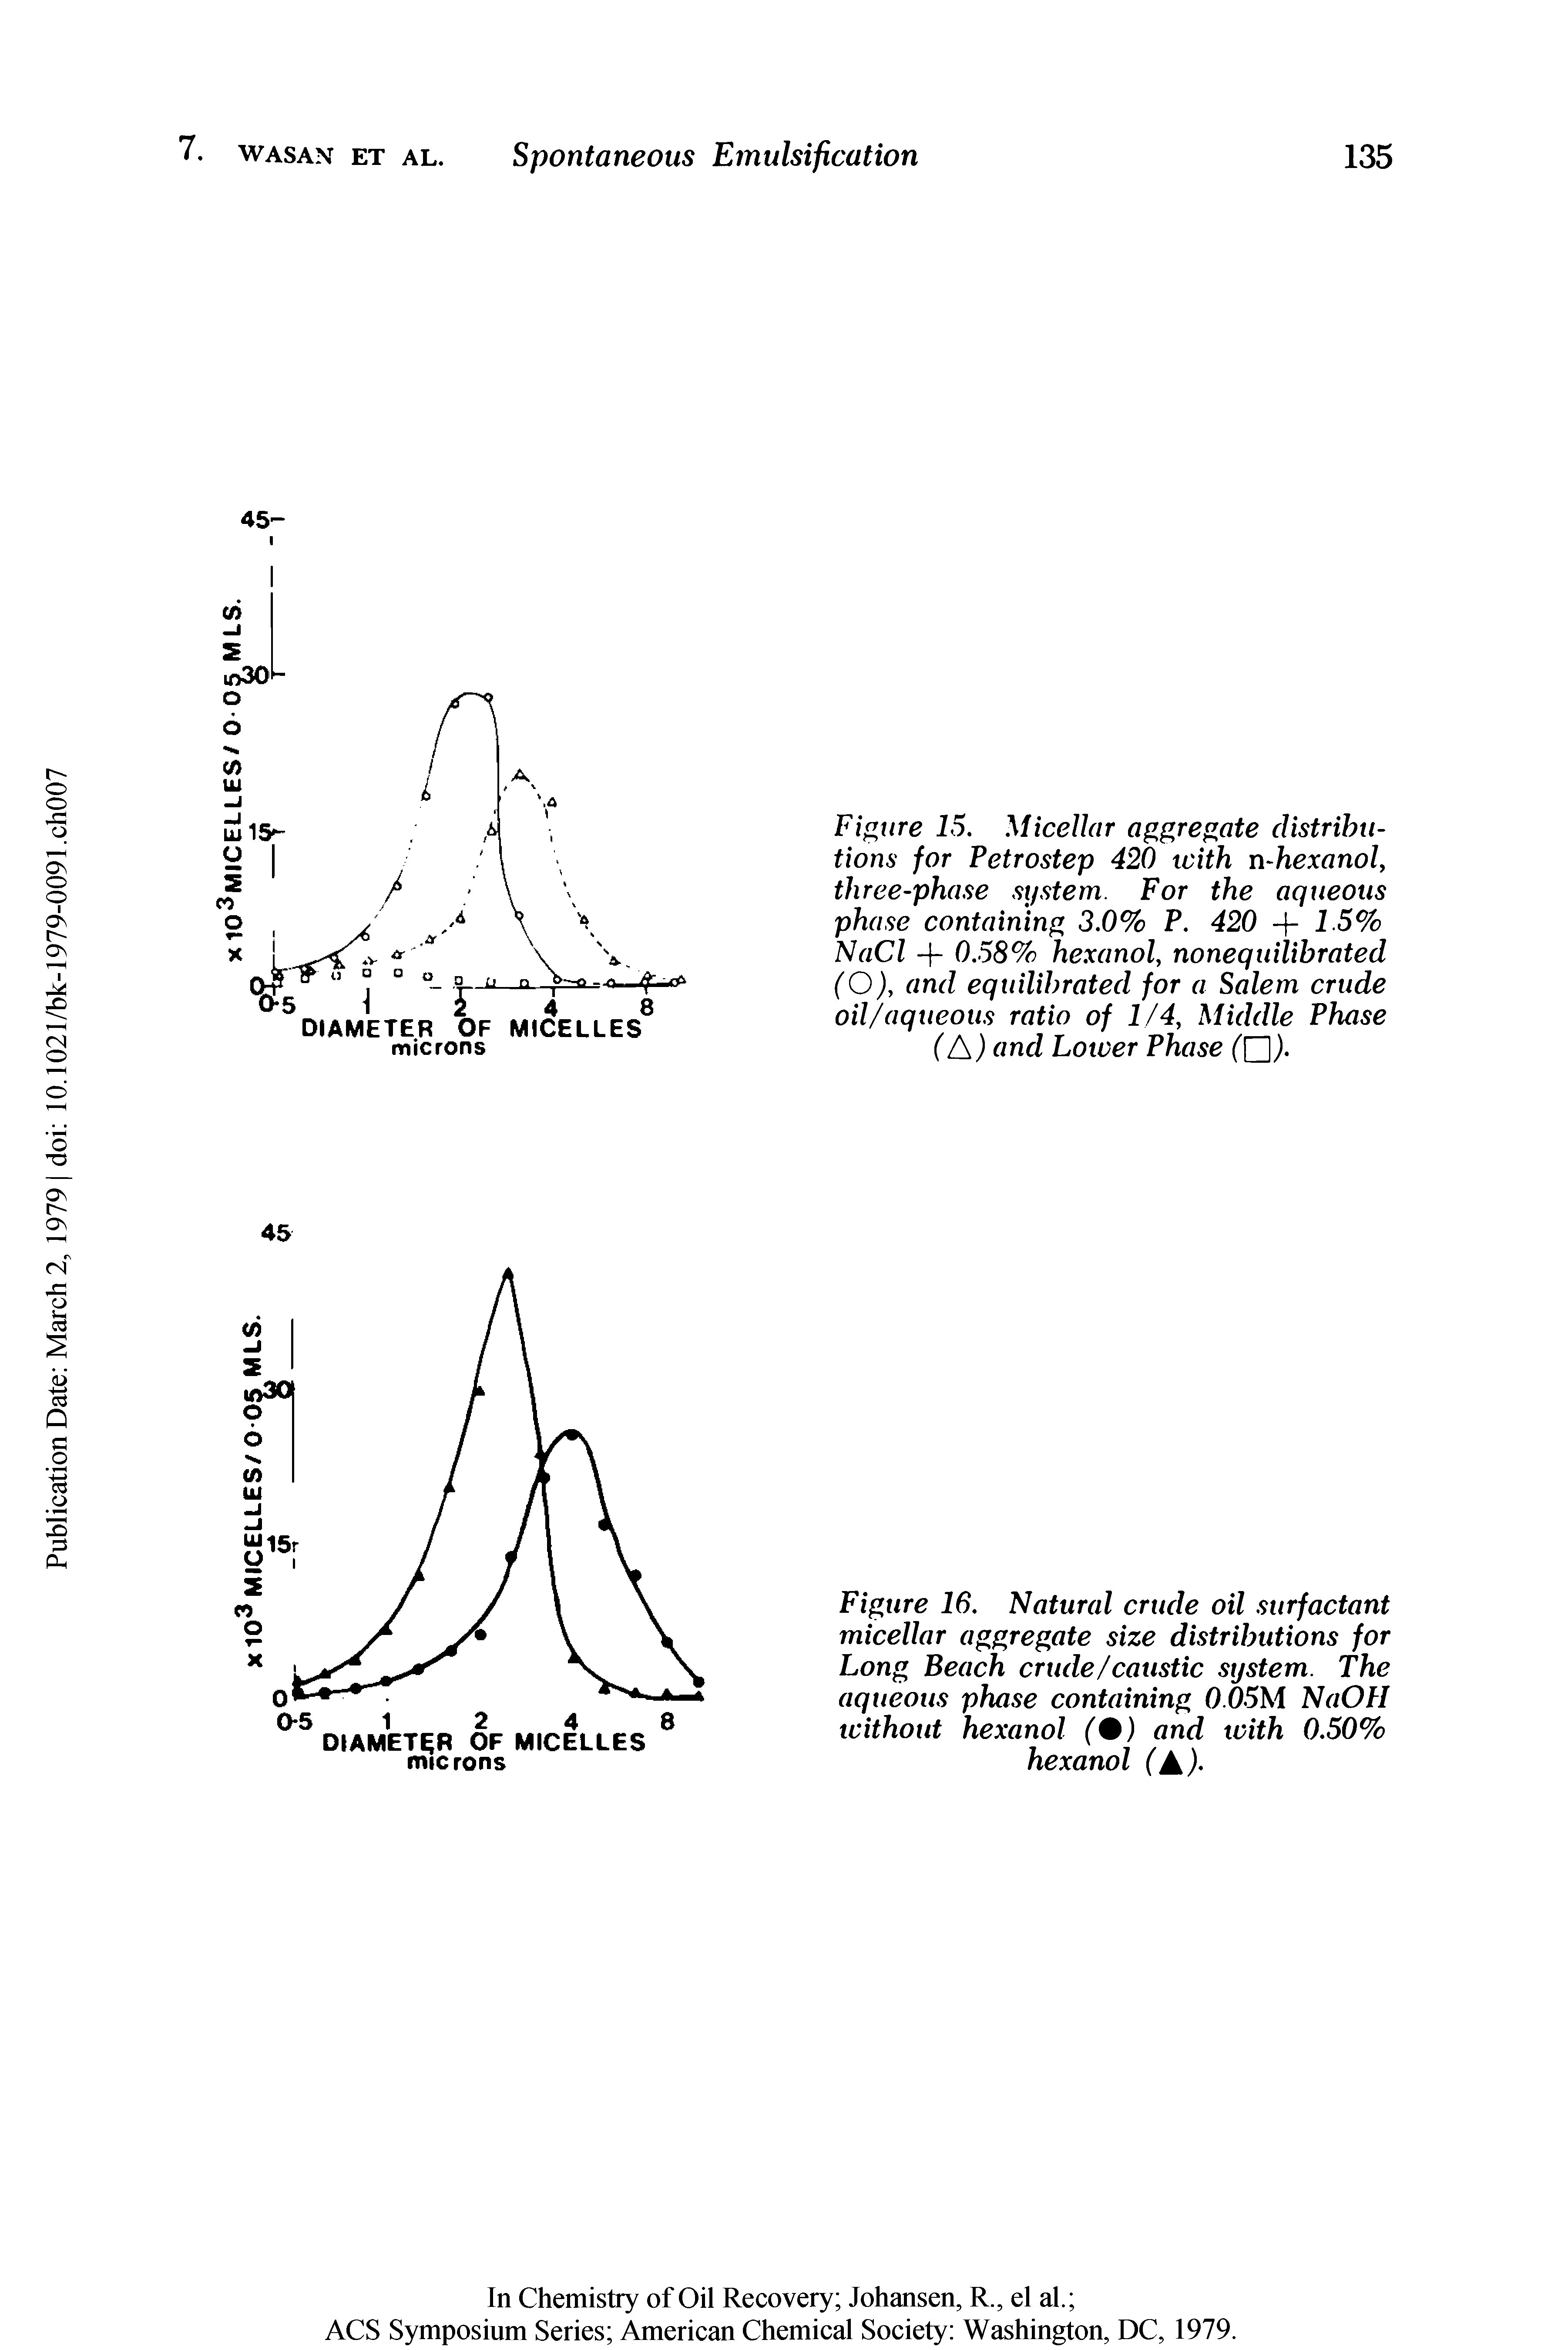 Figure 16. Natural crude oil surfactant micellar aggregate size distributions for Long Beach crude/caustic system. The aqueous phase containing 0.05M NaOFI without hexanol (0) and with 0.50% hexanol ( ).